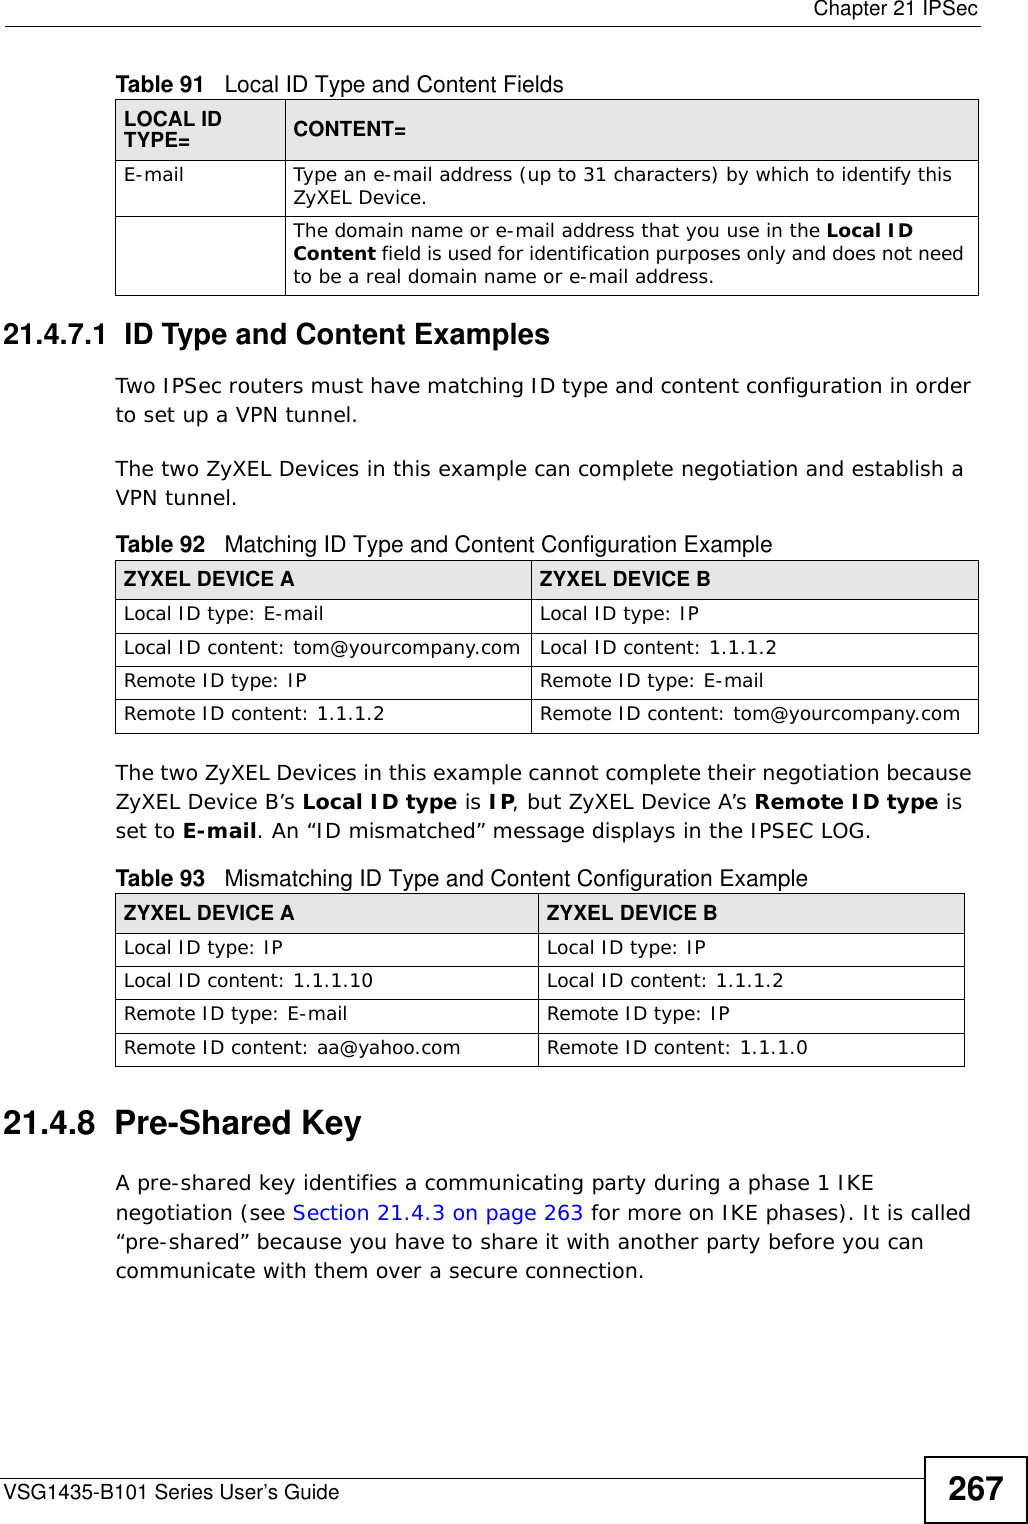  Chapter 21 IPSecVSG1435-B101 Series User’s Guide 26721.4.7.1  ID Type and Content ExamplesTwo IPSec routers must have matching ID type and content configuration in order to set up a VPN tunnel. The two ZyXEL Devices in this example can complete negotiation and establish a VPN tunnel.The two ZyXEL Devices in this example cannot complete their negotiation because ZyXEL Device B’s Local ID type is IP, but ZyXEL Device A’s Remote ID type is set to E-mail. An “ID mismatched” message displays in the IPSEC LOG. 21.4.8  Pre-Shared KeyA pre-shared key identifies a communicating party during a phase 1 IKE negotiation (see Section 21.4.3 on page 263 for more on IKE phases). It is called “pre-shared” because you have to share it with another party before you can communicate with them over a secure connection.E-mail Type an e-mail address (up to 31 characters) by which to identify this ZyXEL Device.The domain name or e-mail address that you use in the Local ID Content field is used for identification purposes only and does not need to be a real domain name or e-mail address.Table 91   Local ID Type and Content FieldsLOCAL ID TYPE= CONTENT=Table 92   Matching ID Type and Content Configuration ExampleZYXEL DEVICE A ZYXEL DEVICE BLocal ID type: E-mail Local ID type: IPLocal ID content: tom@yourcompany.com Local ID content: 1.1.1.2Remote ID type: IP Remote ID type: E-mailRemote ID content: 1.1.1.2 Remote ID content: tom@yourcompany.comTable 93   Mismatching ID Type and Content Configuration ExampleZYXEL DEVICE A ZYXEL DEVICE BLocal ID type: IP Local ID type: IPLocal ID content: 1.1.1.10 Local ID content: 1.1.1.2Remote ID type: E-mail Remote ID type: IPRemote ID content: aa@yahoo.com Remote ID content: 1.1.1.0